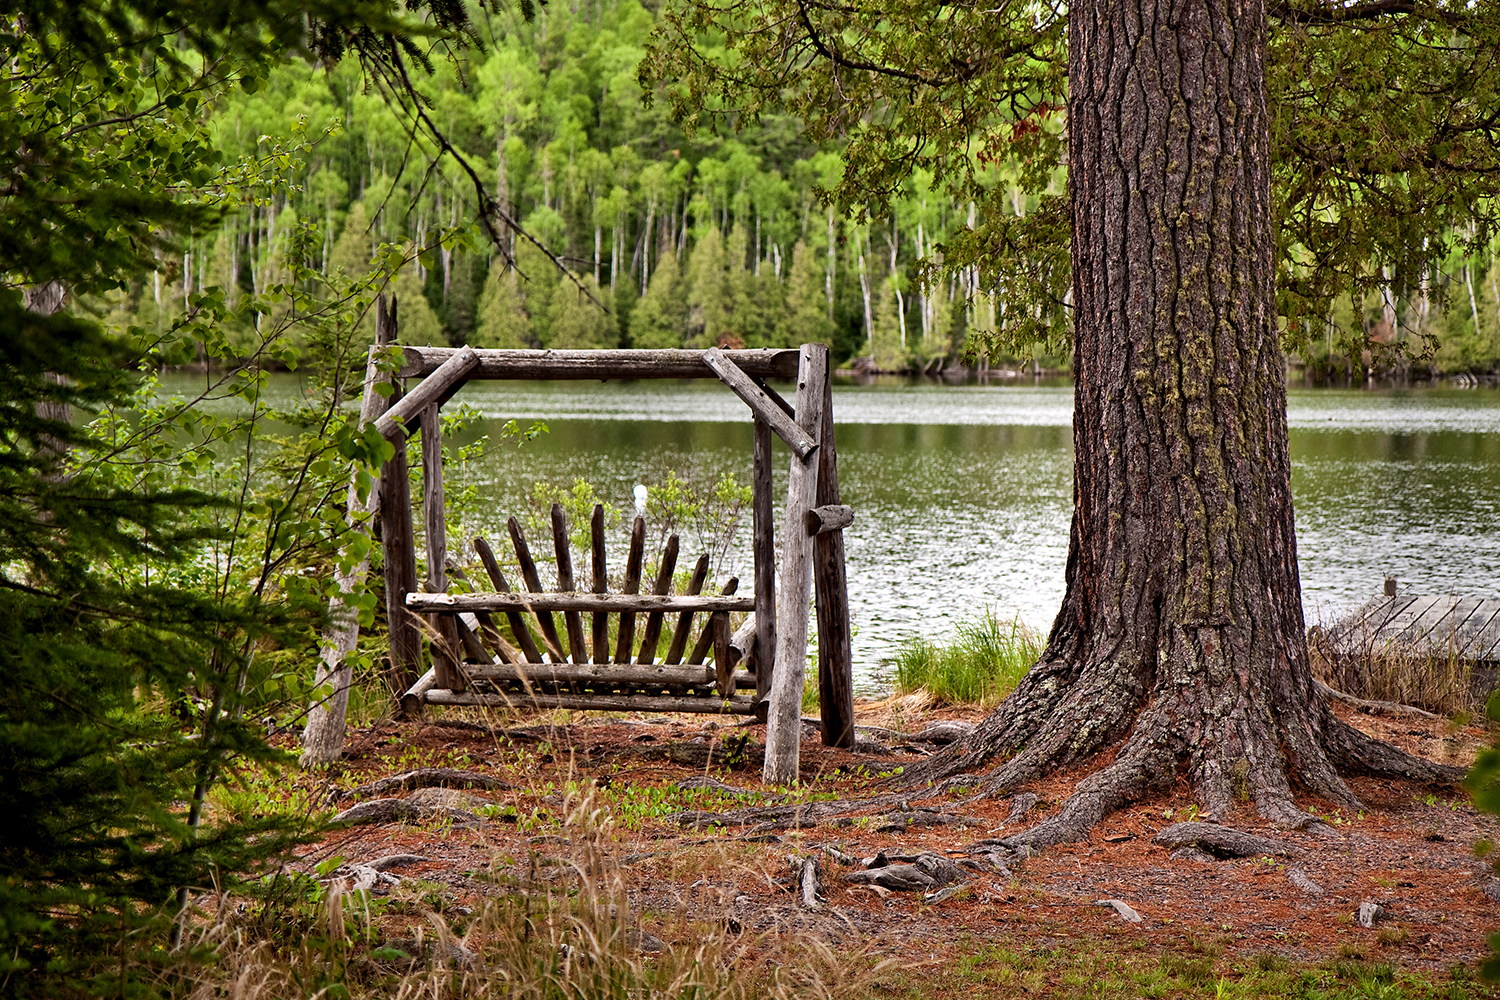 View from behind of a bench swing overlooking a lake